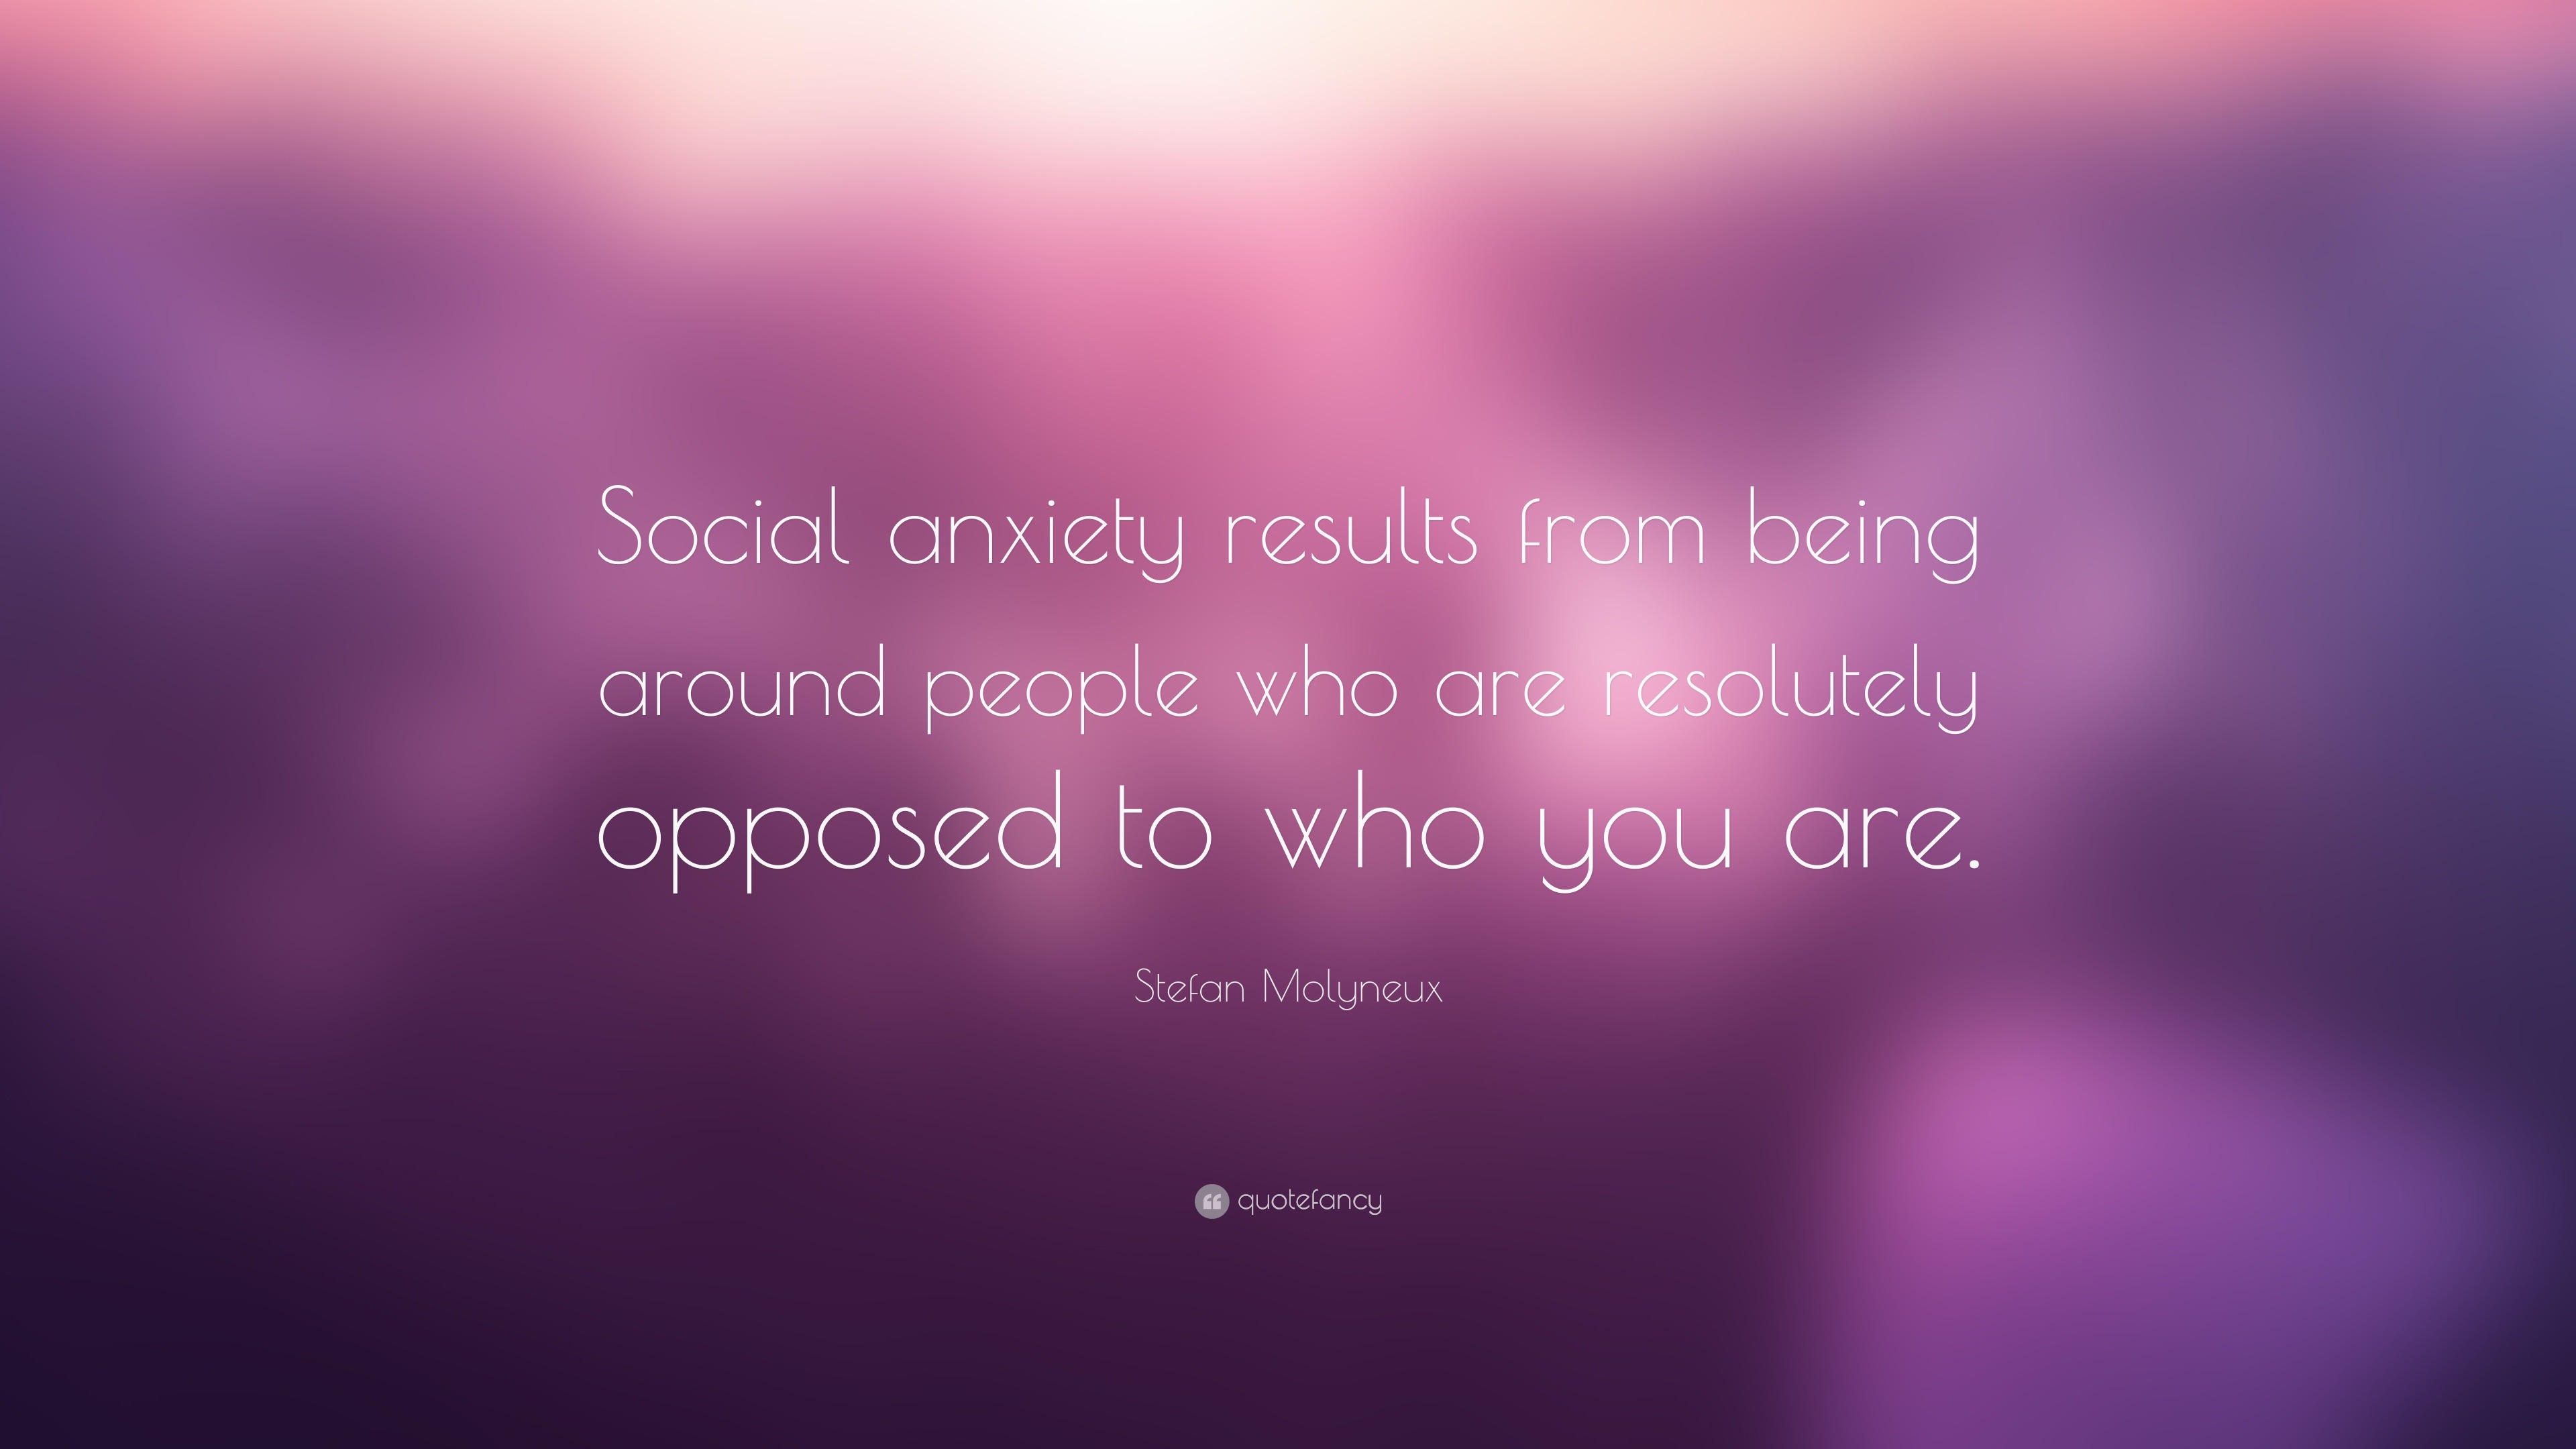 Stefan Molyneux Quote: “Social anxiety results from being around people